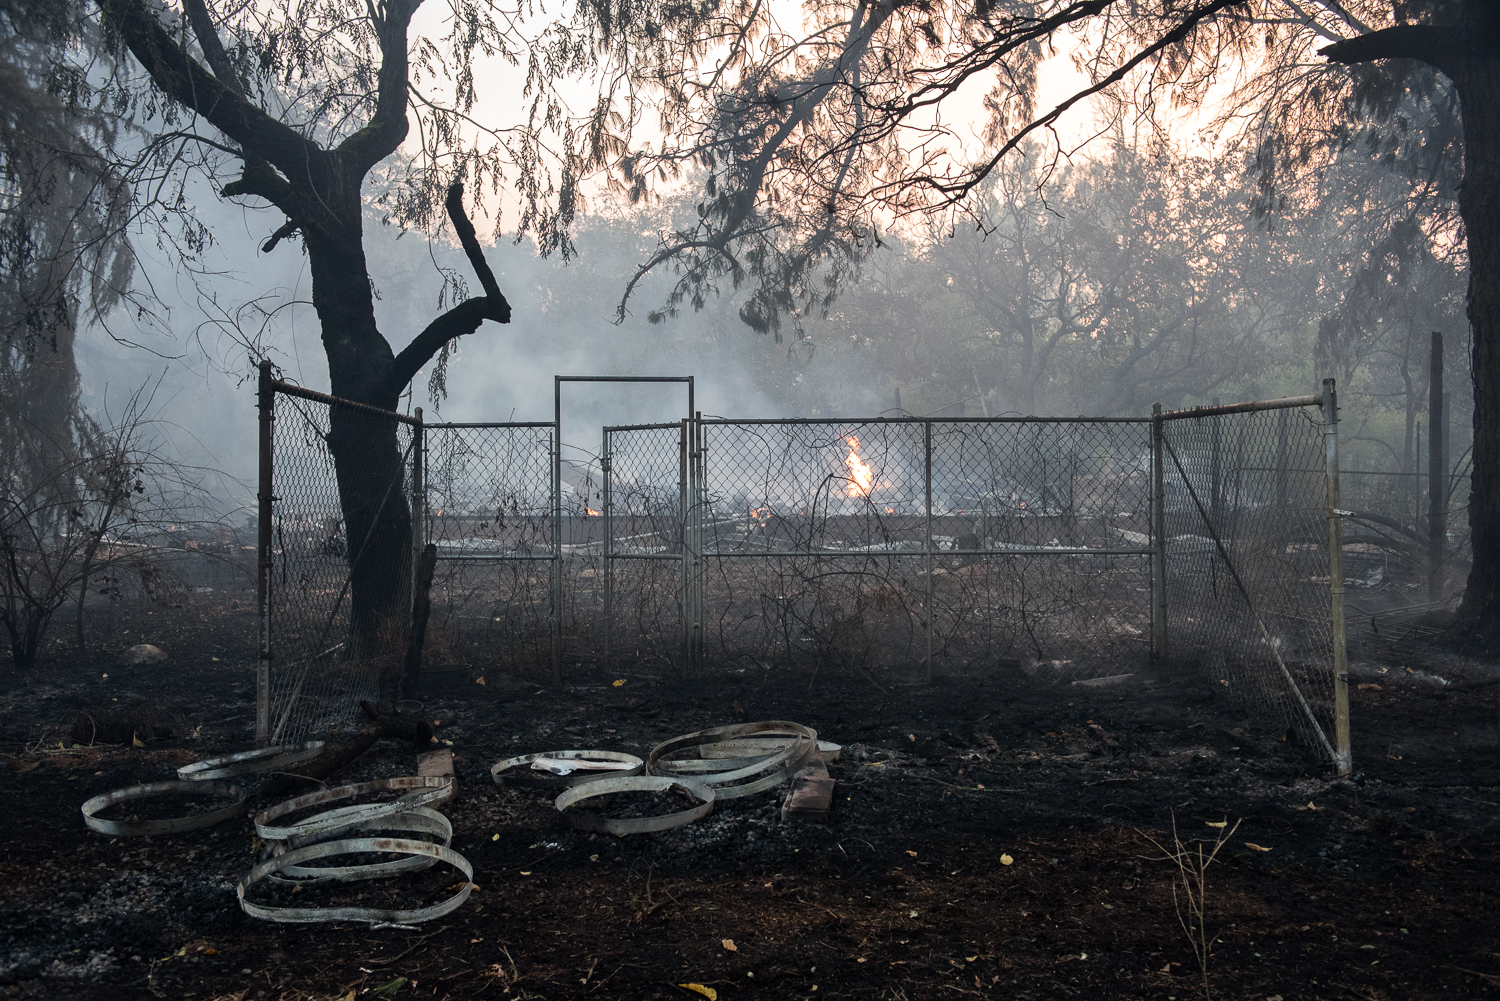  The remains of a burned house smoulder on the morning of Saturday, 14 October 2017, as the sun rises on Sonoma during the devastating North Bay wildfires. 